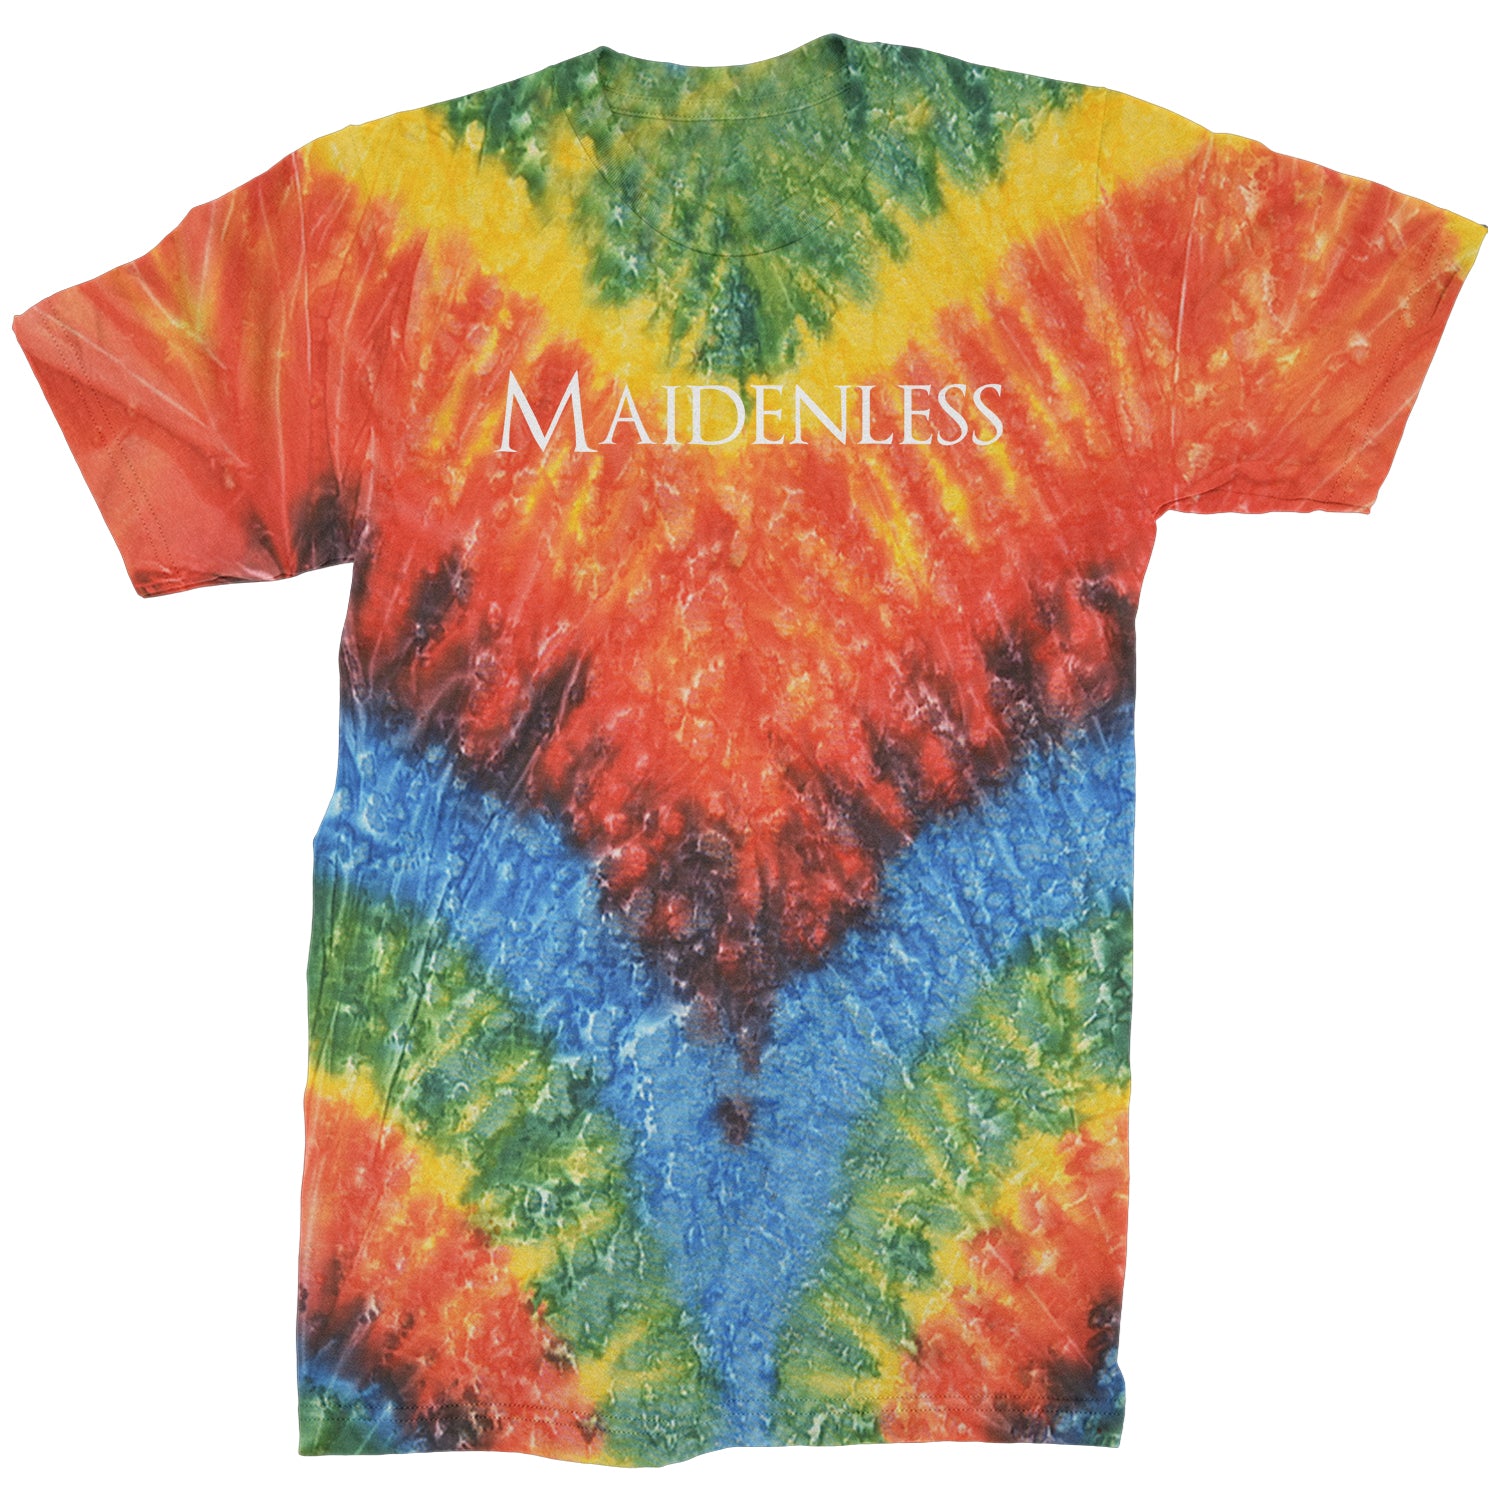 Maidenless Mens T-shirt elden, game, video by Expression Tees